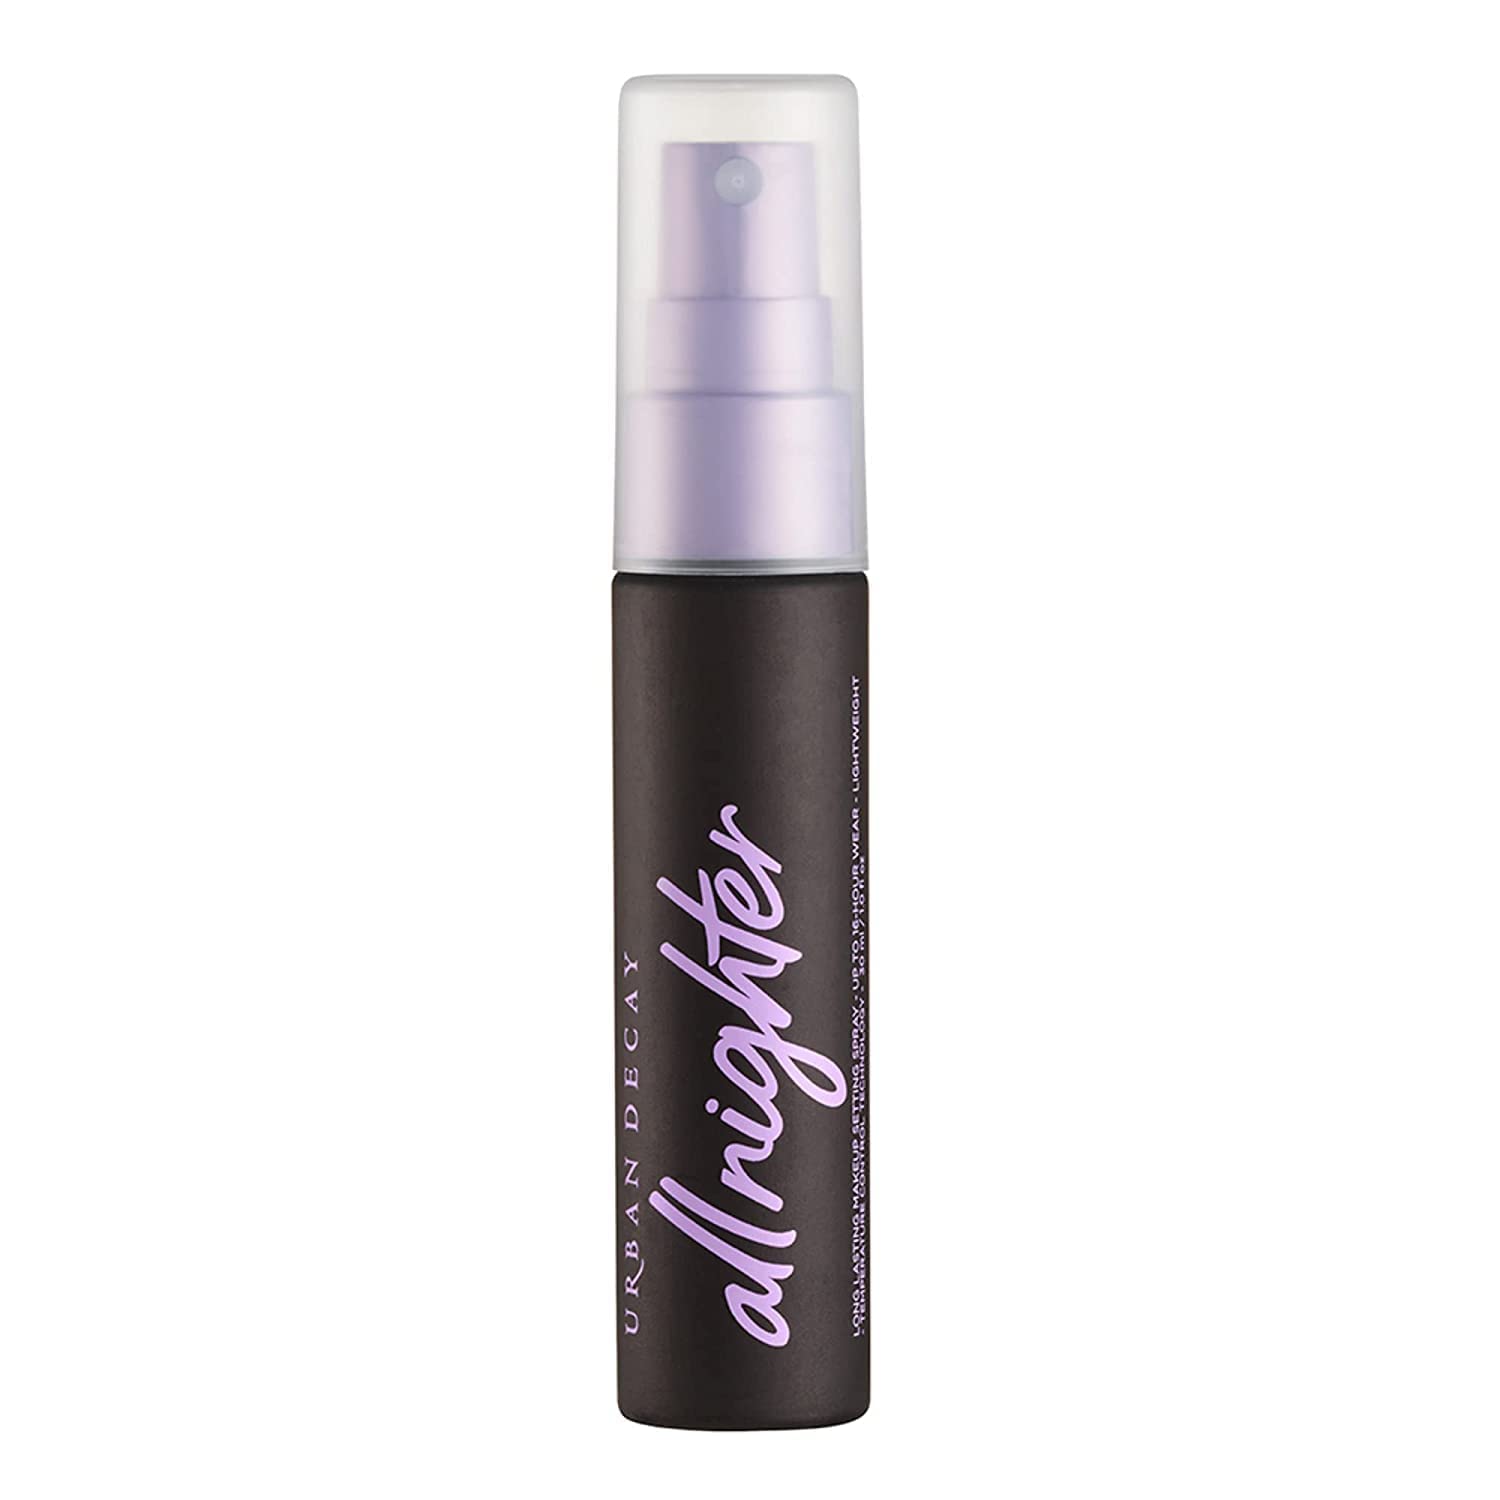 ''URBAN DECAY All Nighter Long Lasting Makeup Setting Spray, Clear, Unscented, 1 Ounce)''